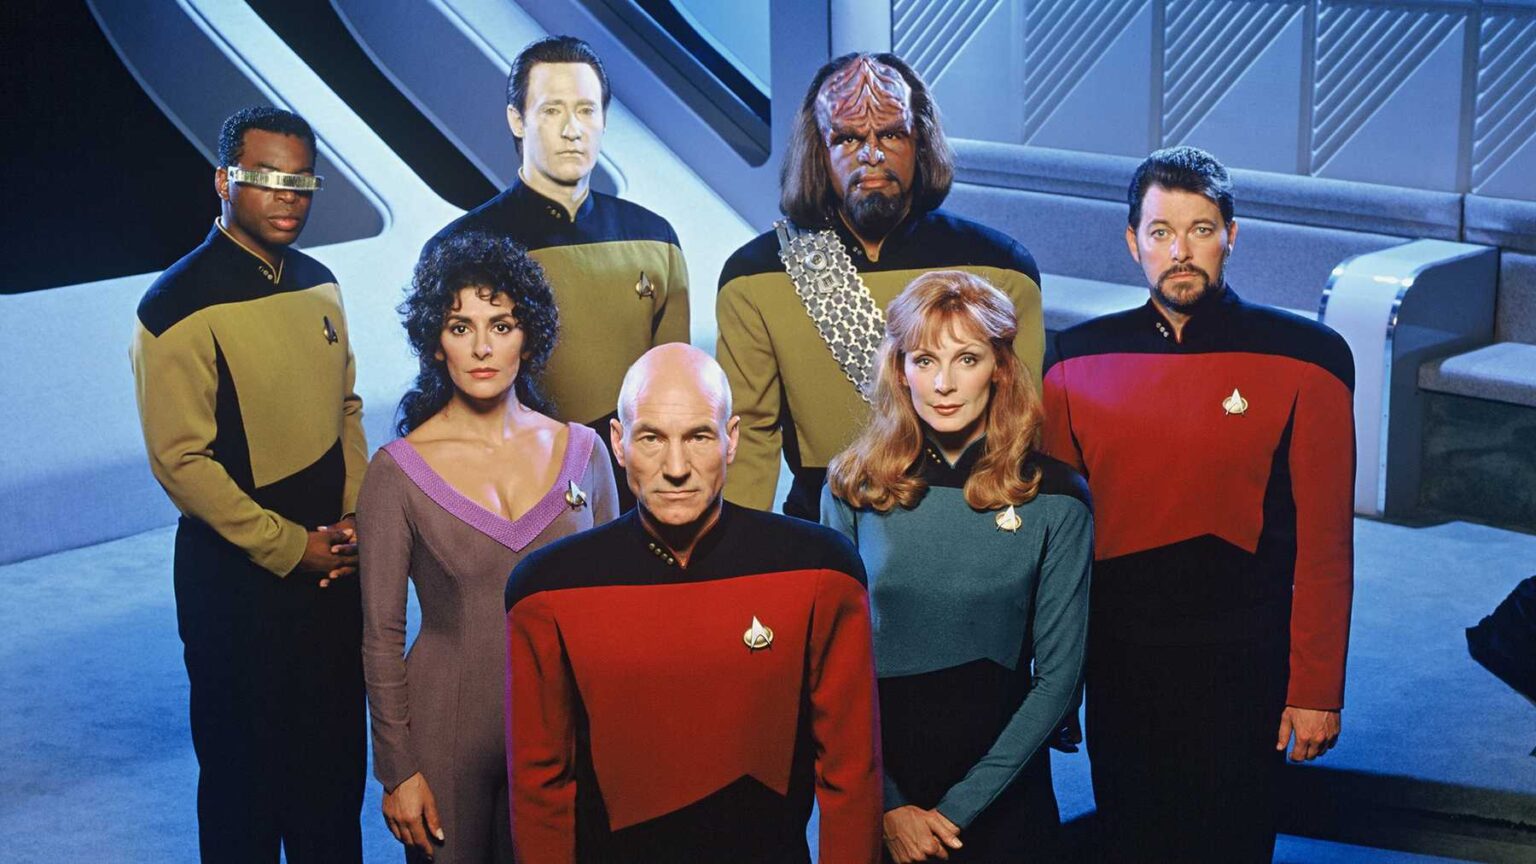 quiz which star trek character are you